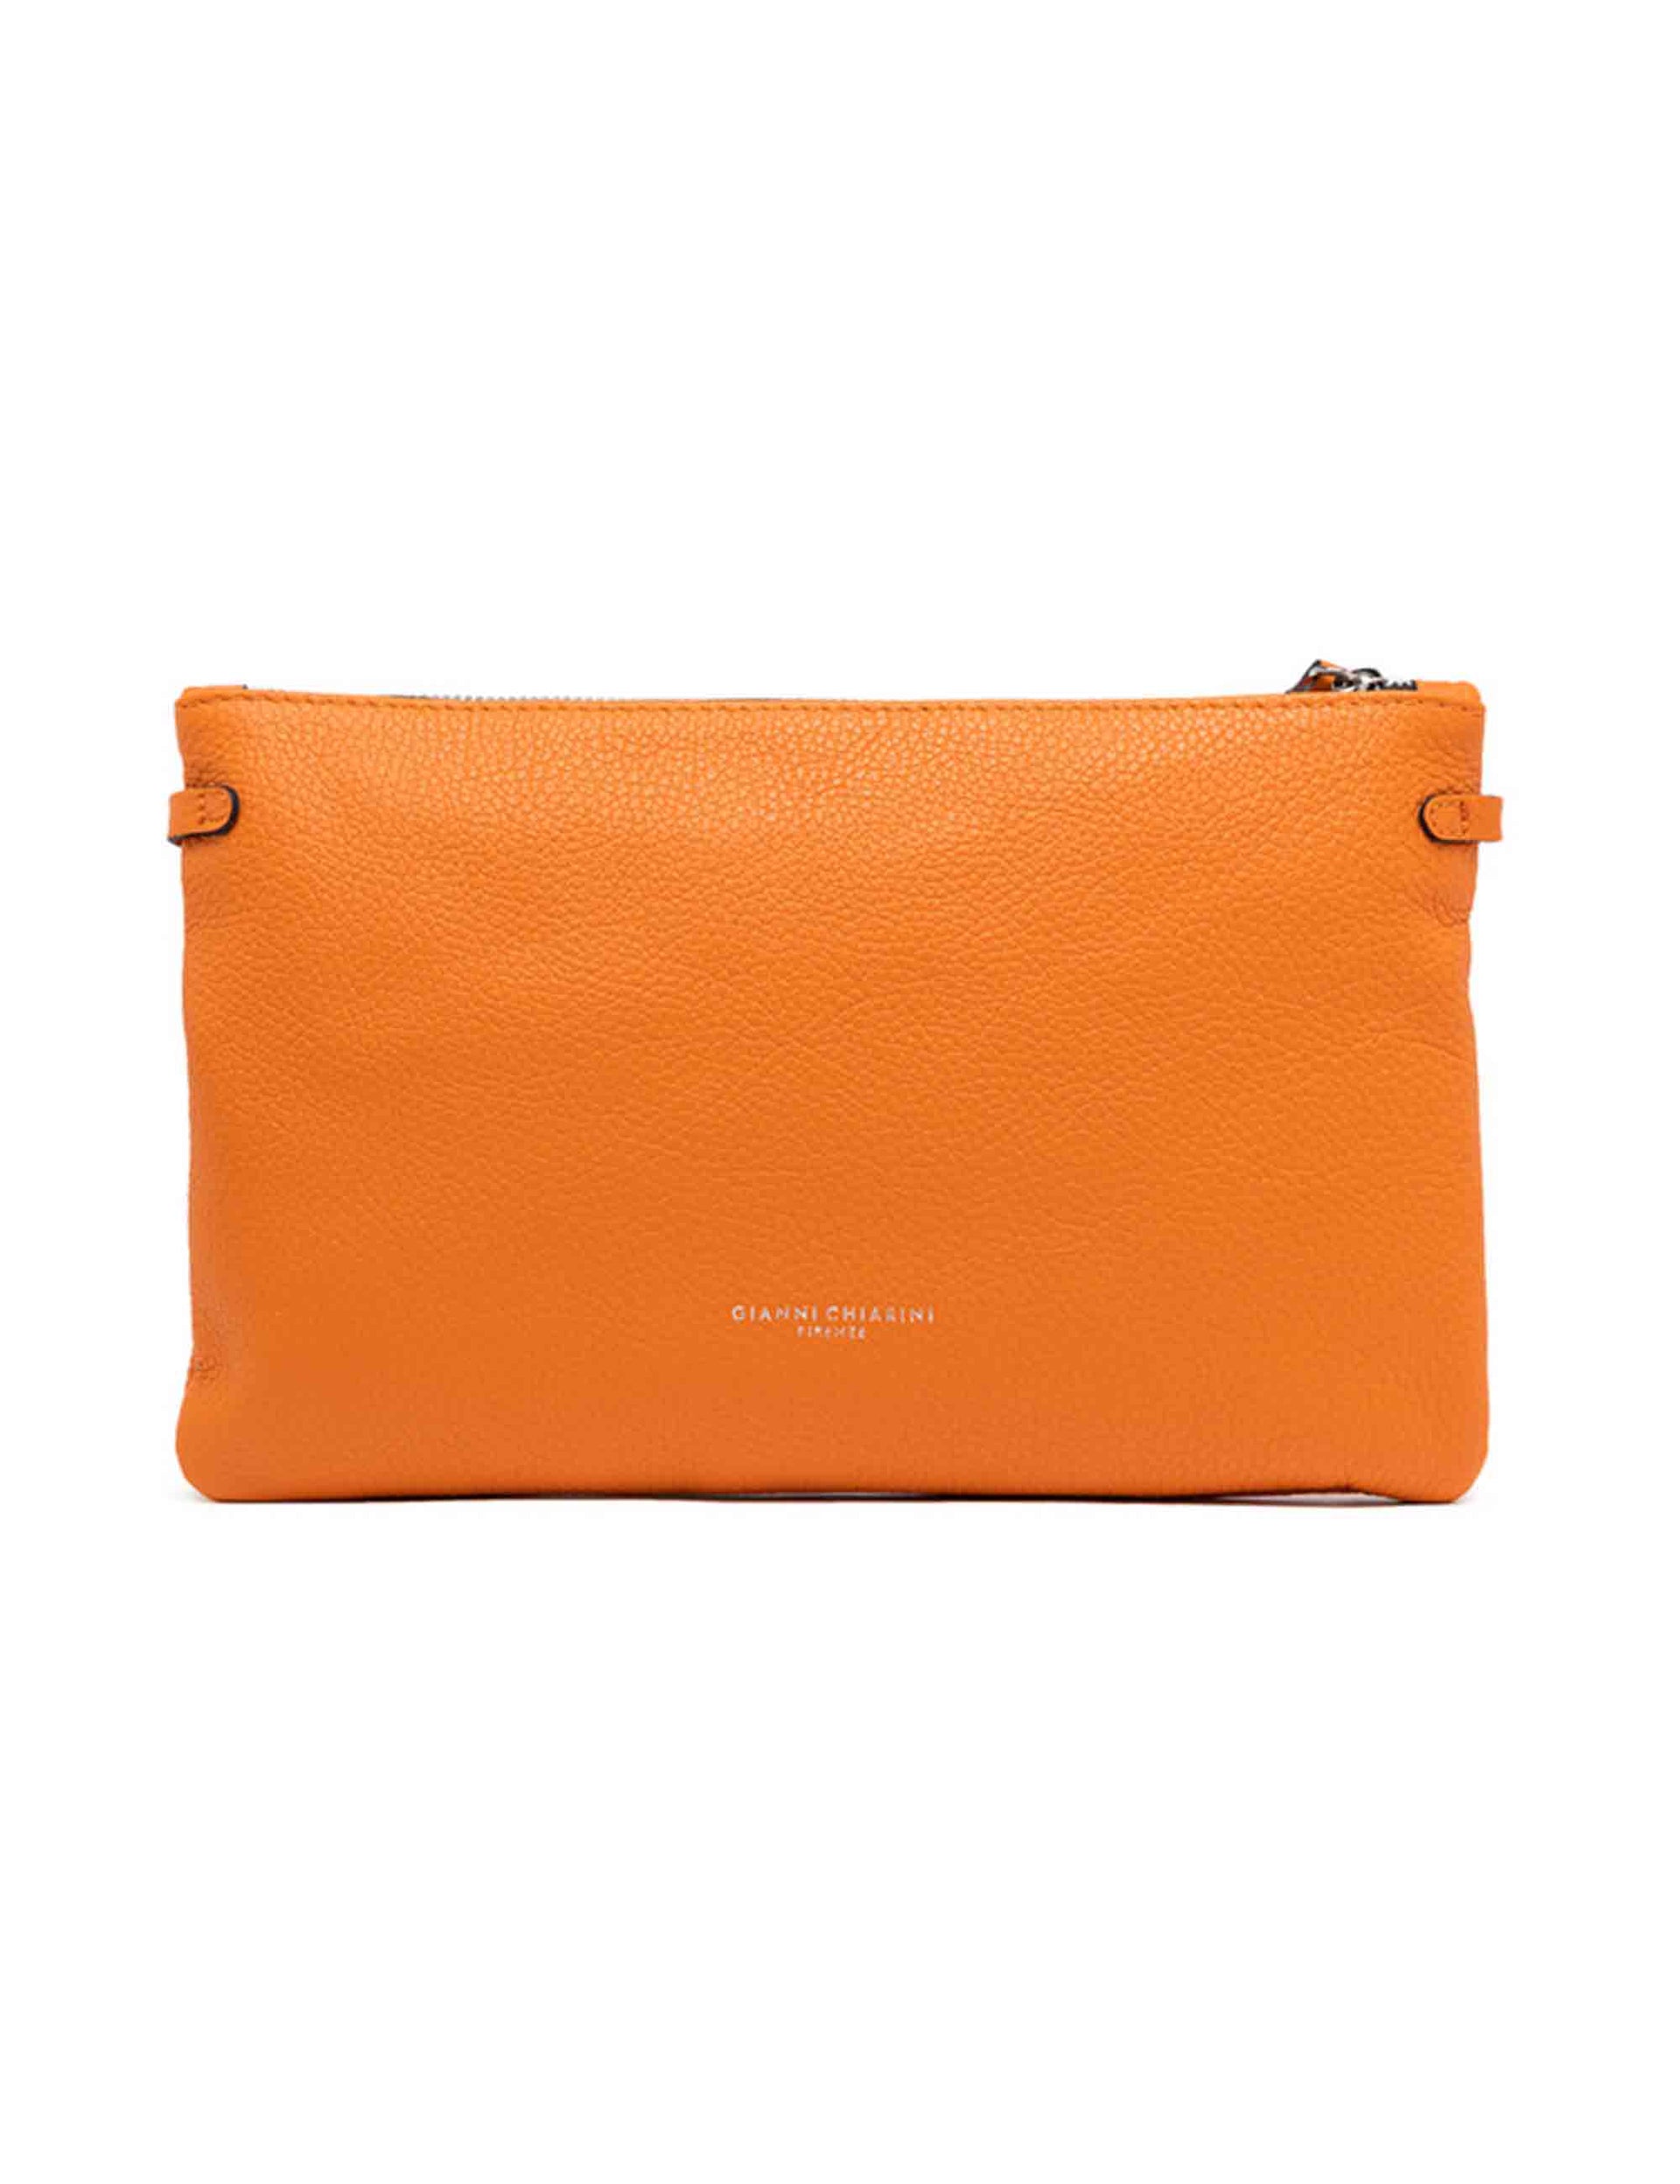 Hermy women's clutch bags in orange leather with bracelet handle and leather shoulder strap